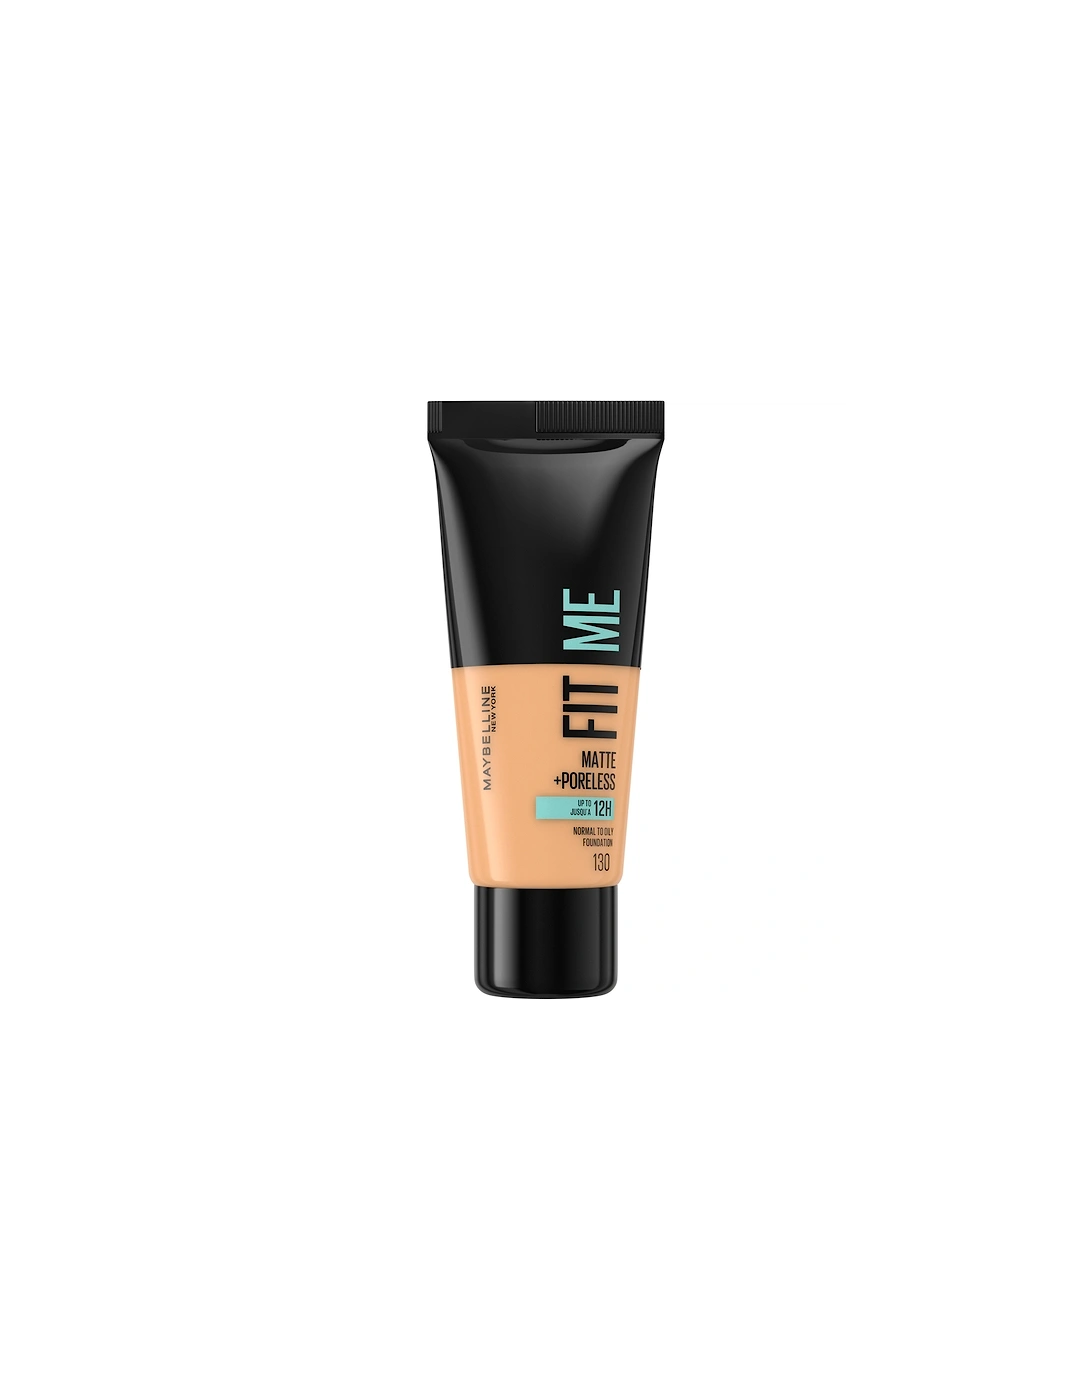 Fit Me! Matte and Poreless Foundation - 130 Buff Beige - - Fit Me! Matte and Poreless Foundation 30ml (Various Shades) - Foundation - Fit Me! Matte and Poreless Foundation 30ml (Various Shades) - Tina - Fit Me! Matte and Poreless Foundation 30ml (Various Shades) - Jo, 2 of 1